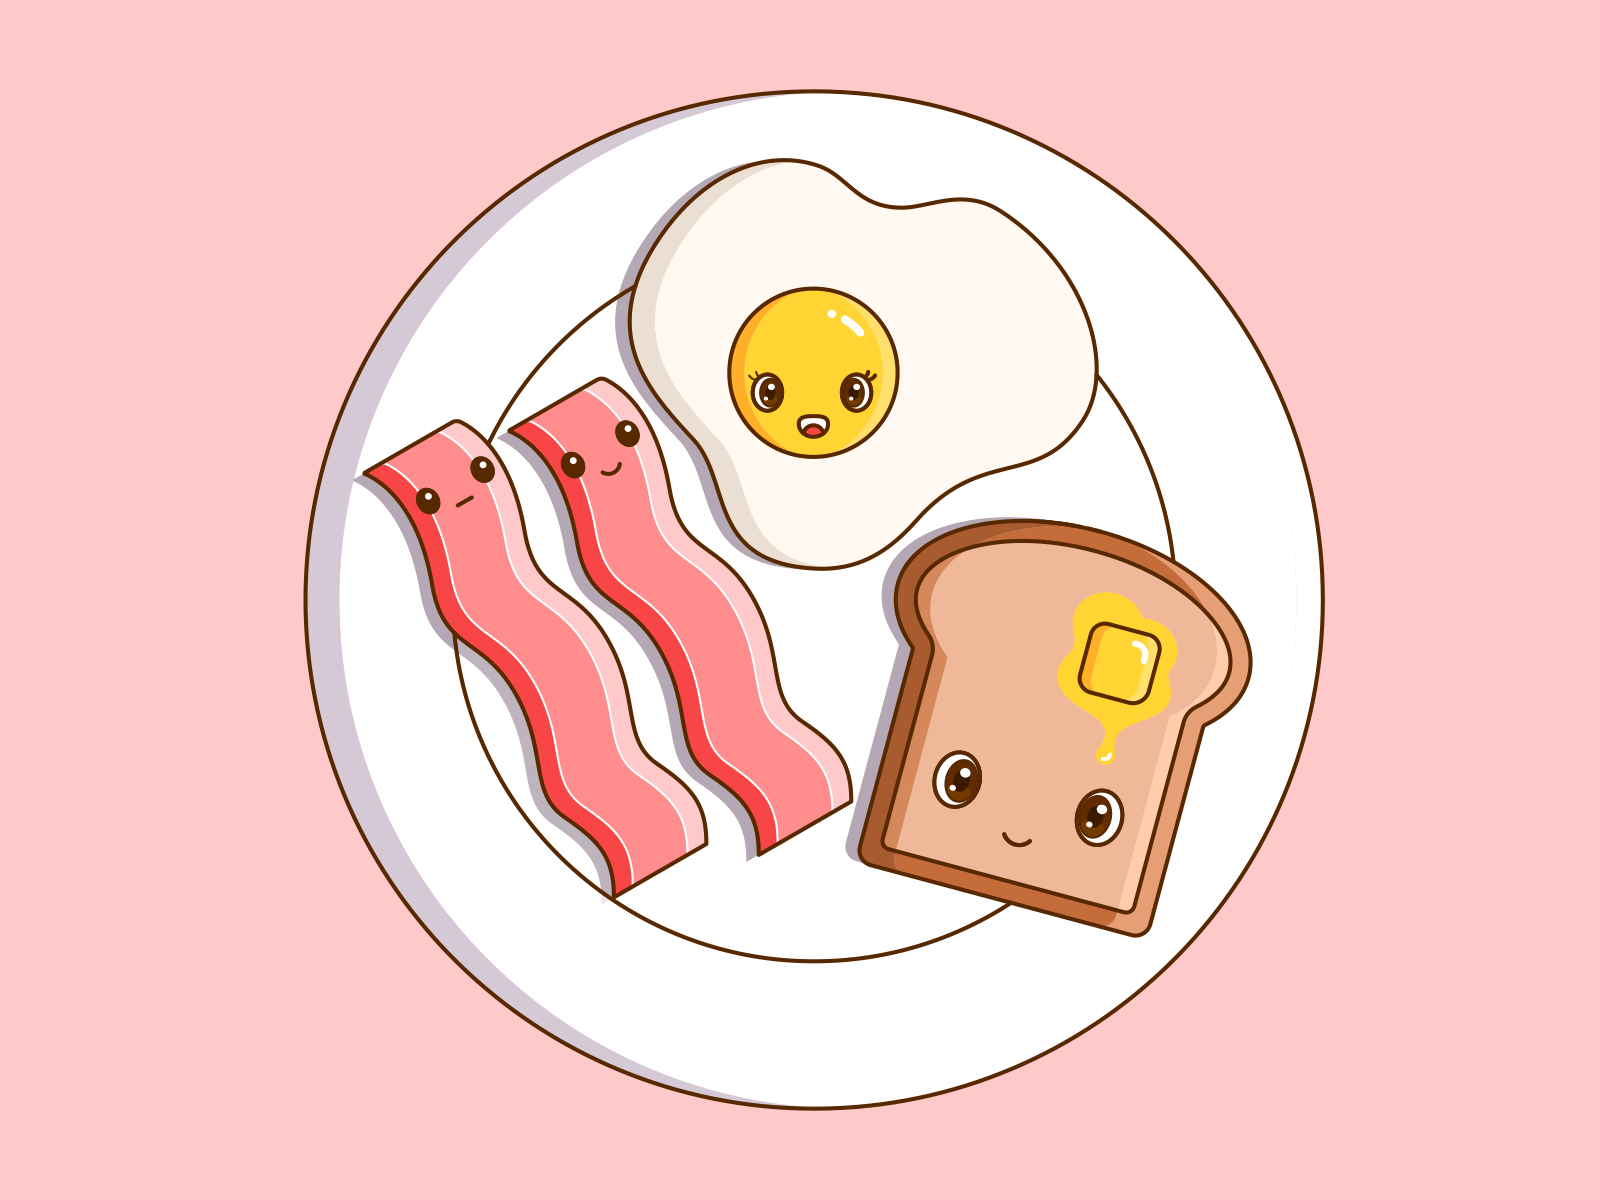 100+] Bacon Pictures | Wallpapers.com